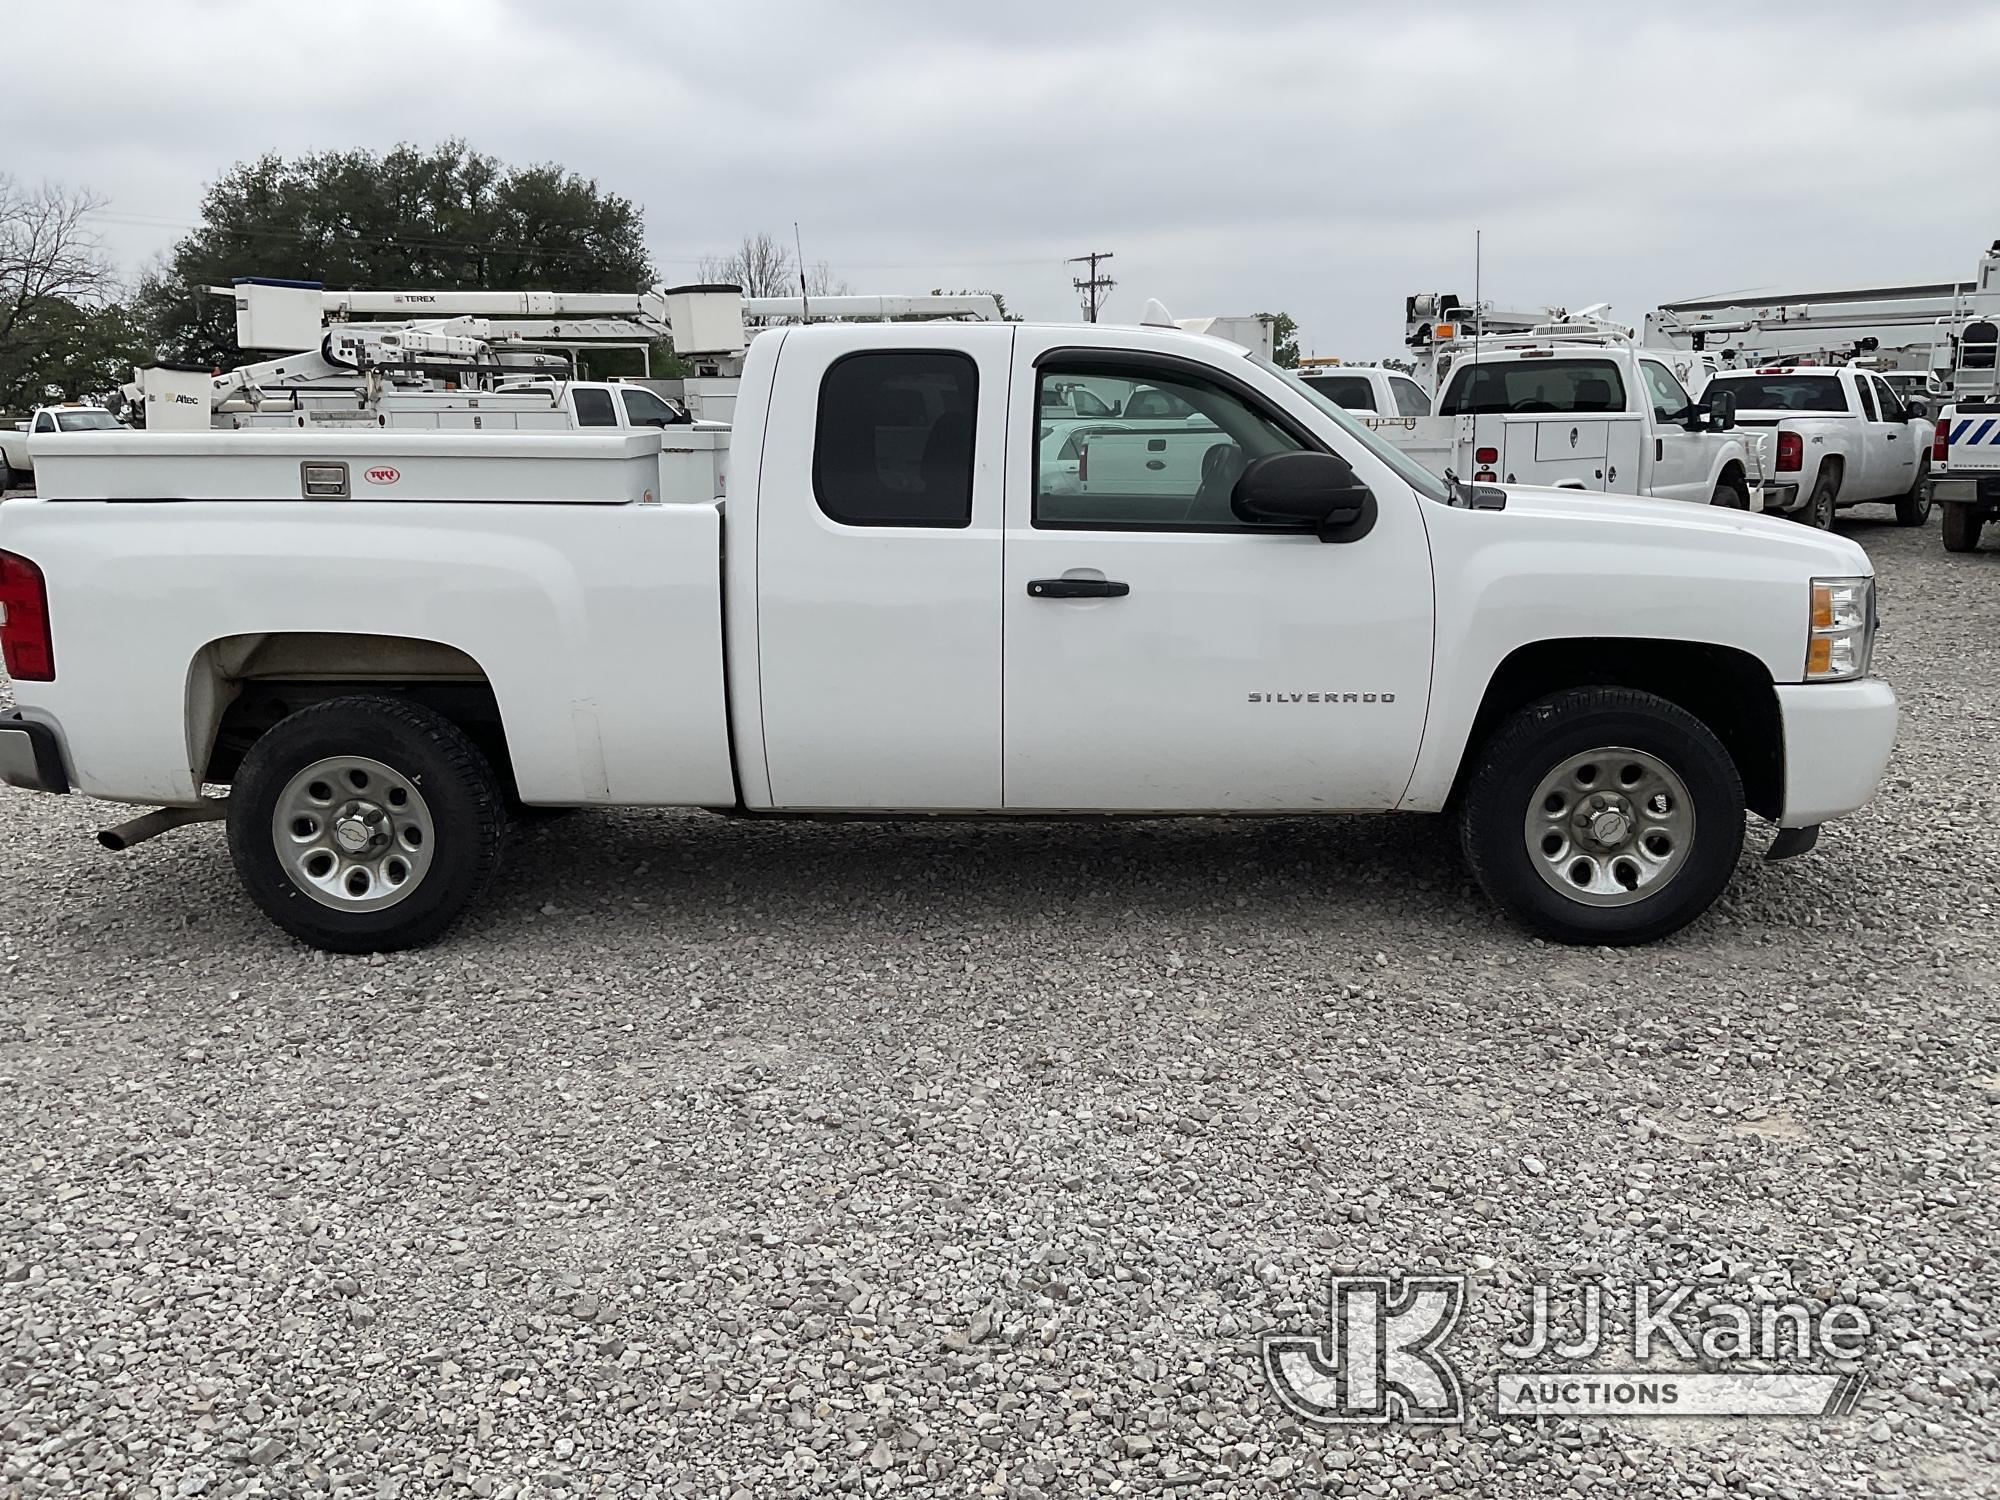 (Johnson City, TX) 2011 Chevrolet Silverado 1500 Extended-Cab Pickup Truck, Cooperative owned and ma